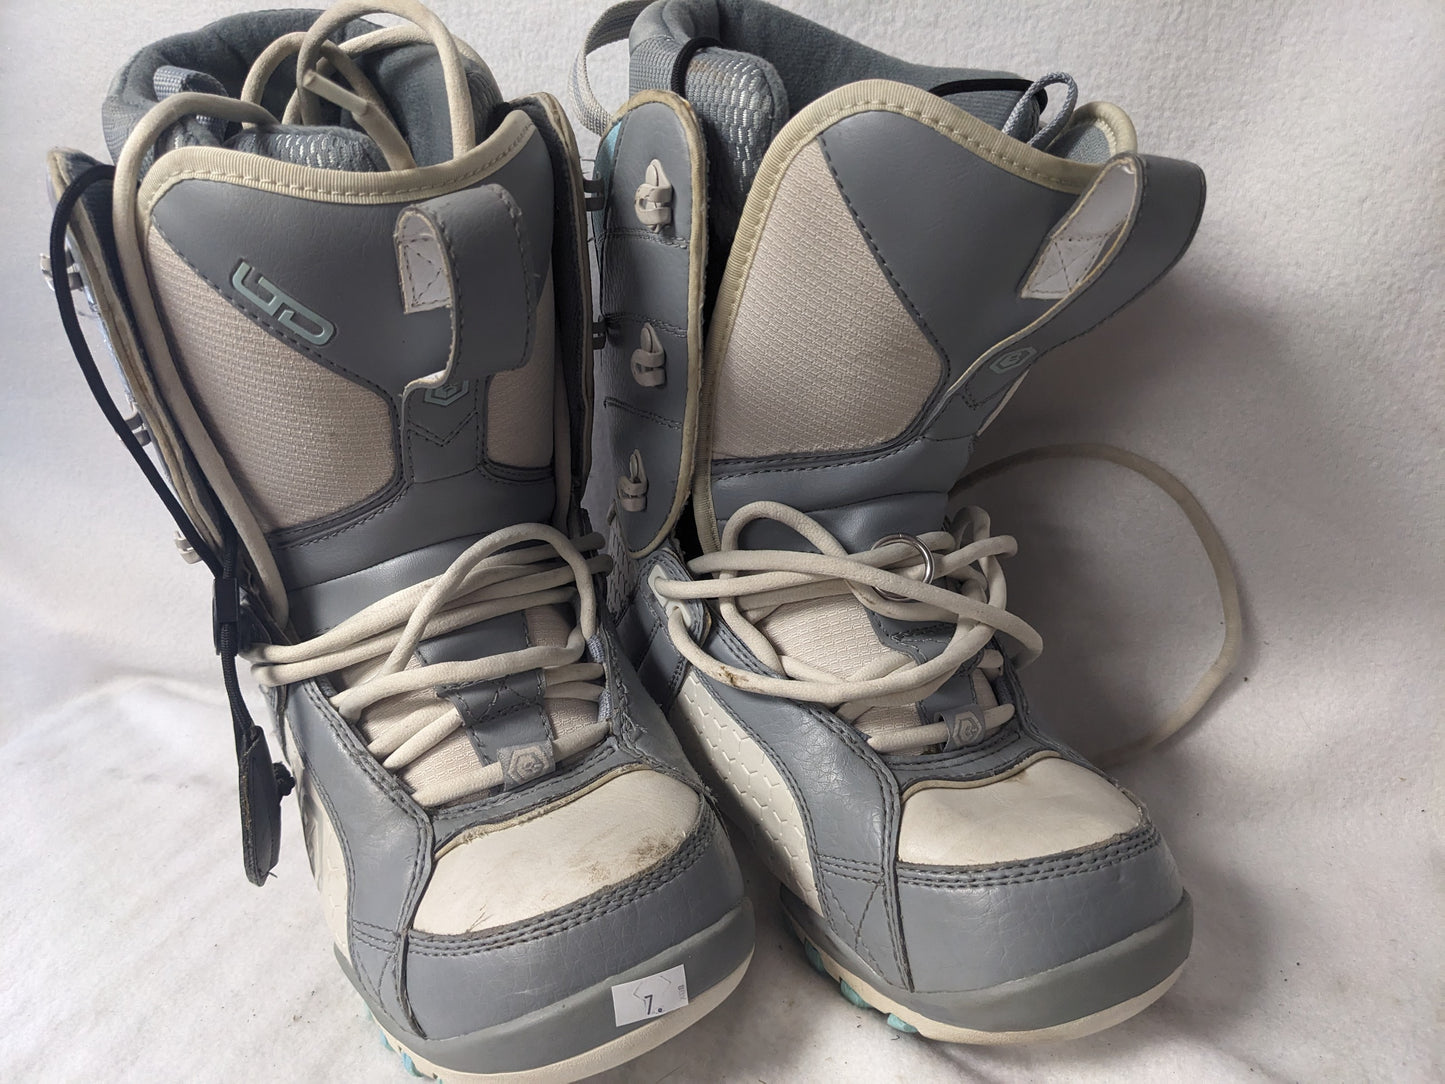 LTDSnow Lace-Up Snowboard Boots Size 7 Color Gray Condition Used